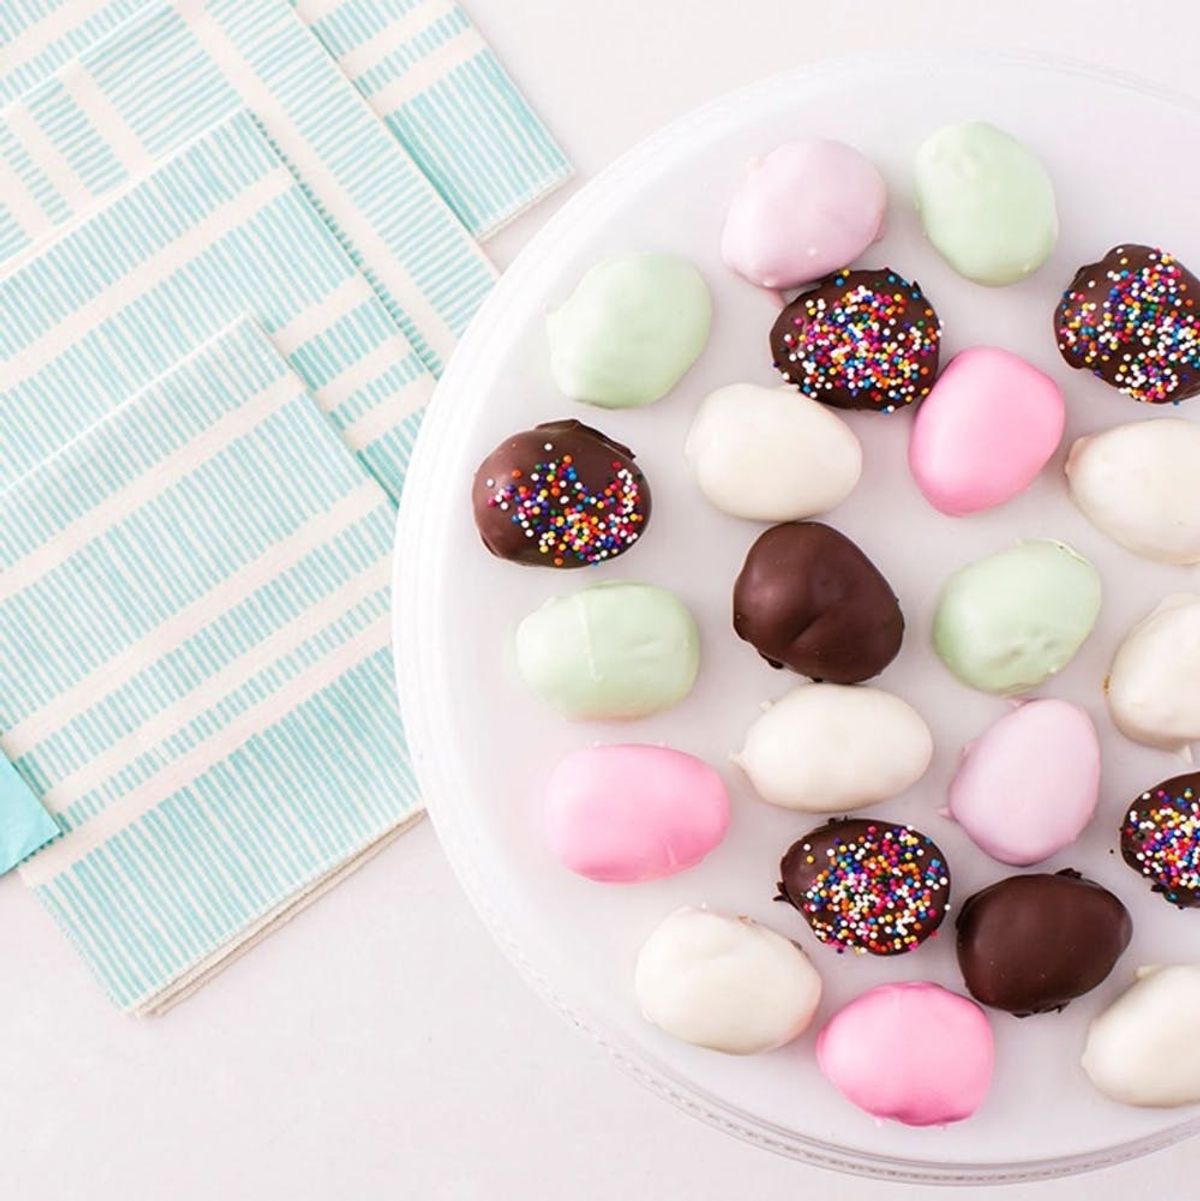 14 Homemade Easter Candies Way Better Than Store-Bought Stuff